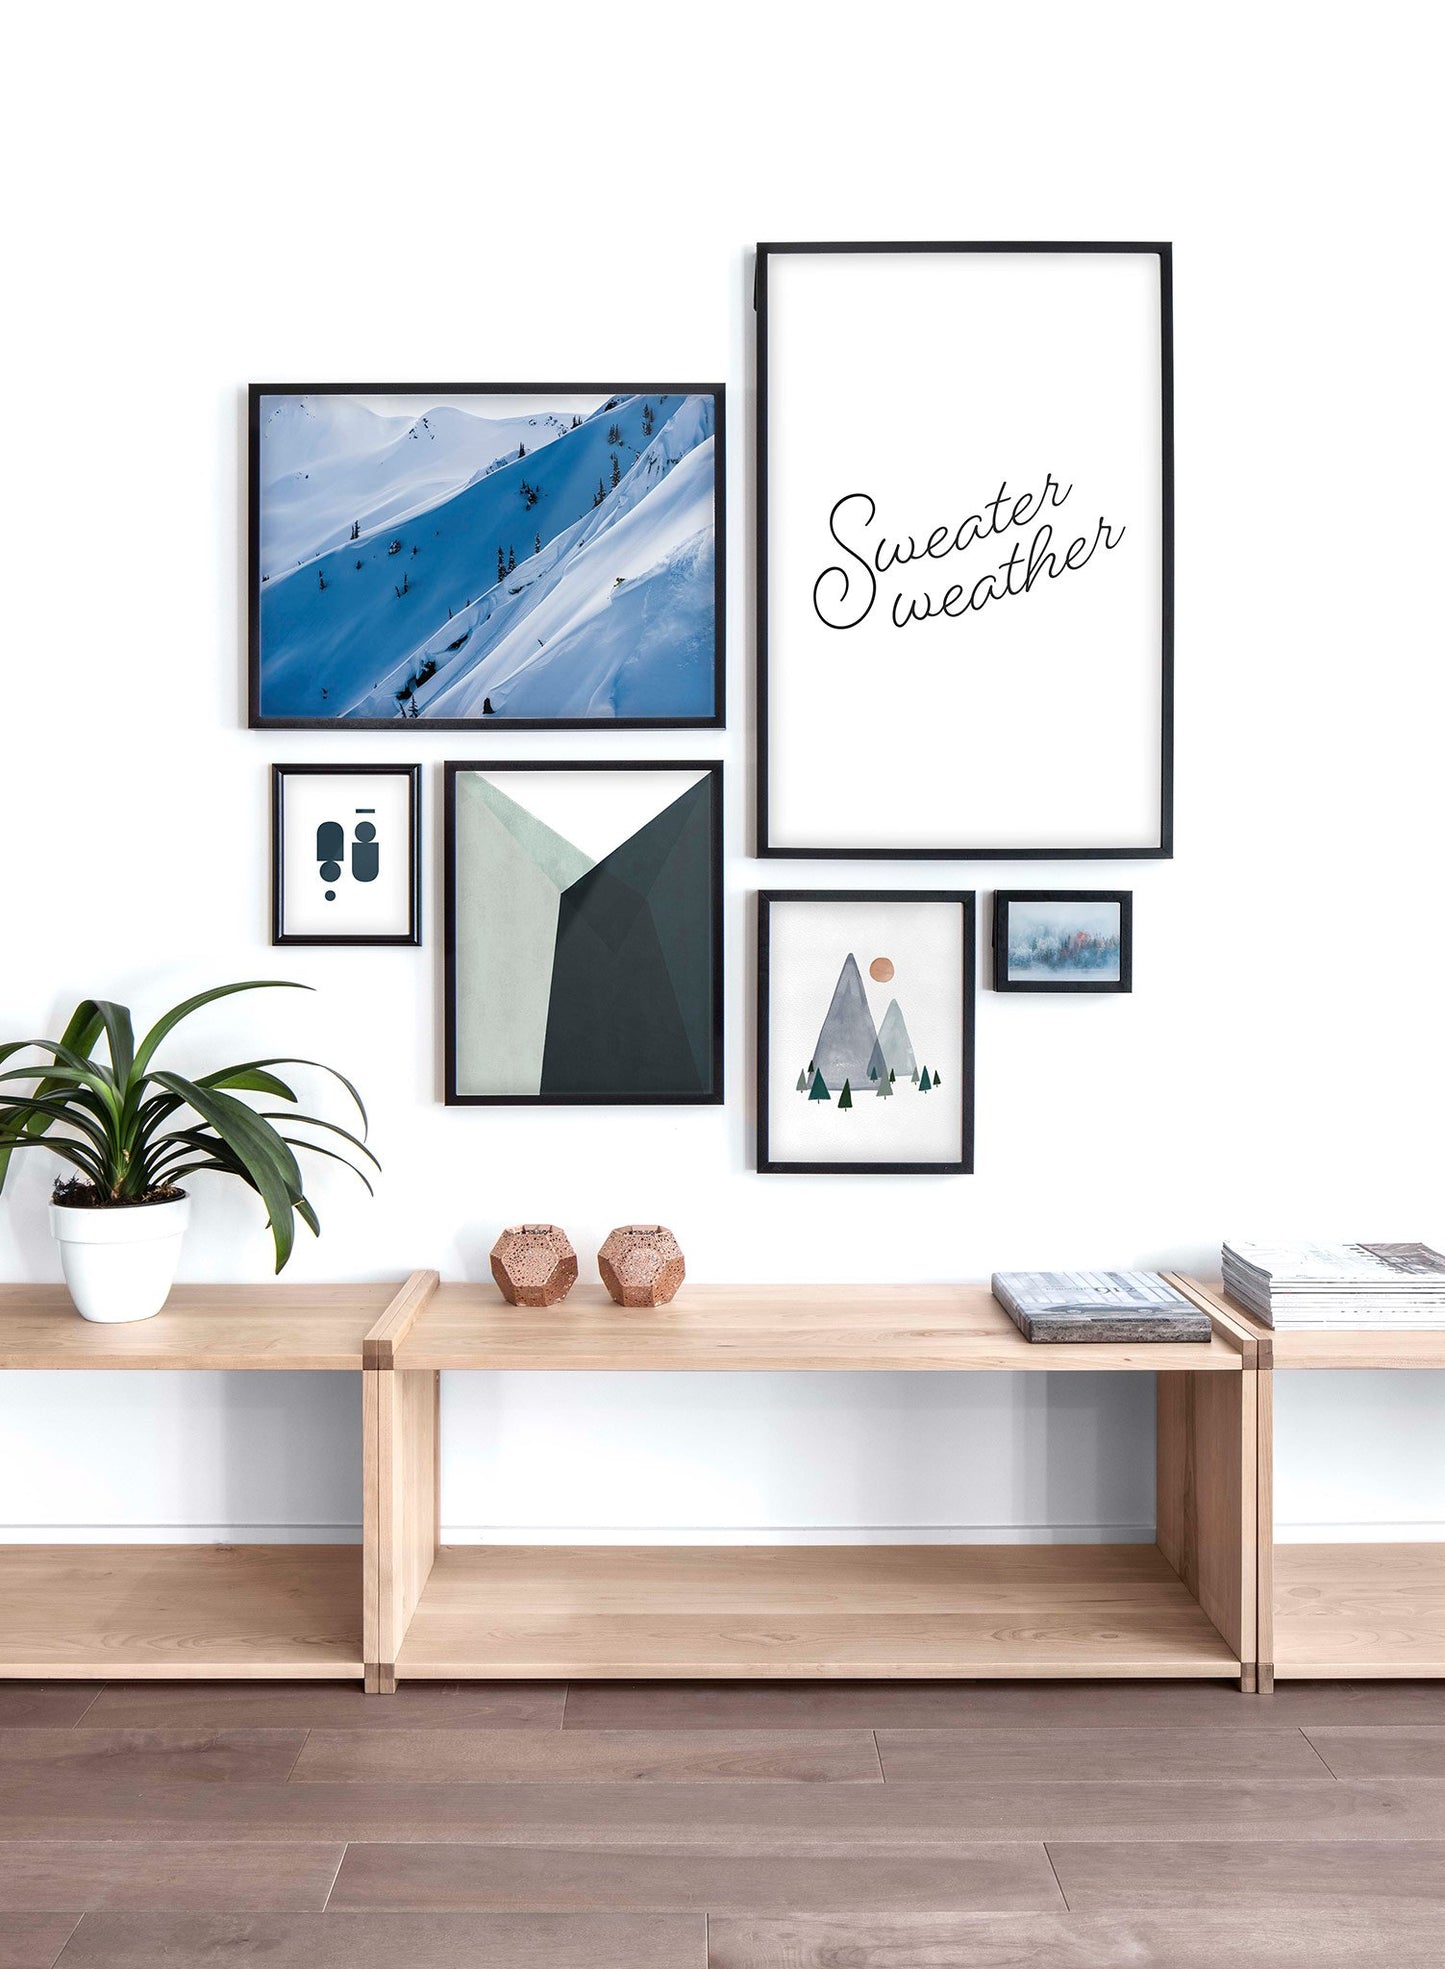 Landscape photography poster by Opposite Wall with white snow on mountain - Lifestyle Gallery - Living Room